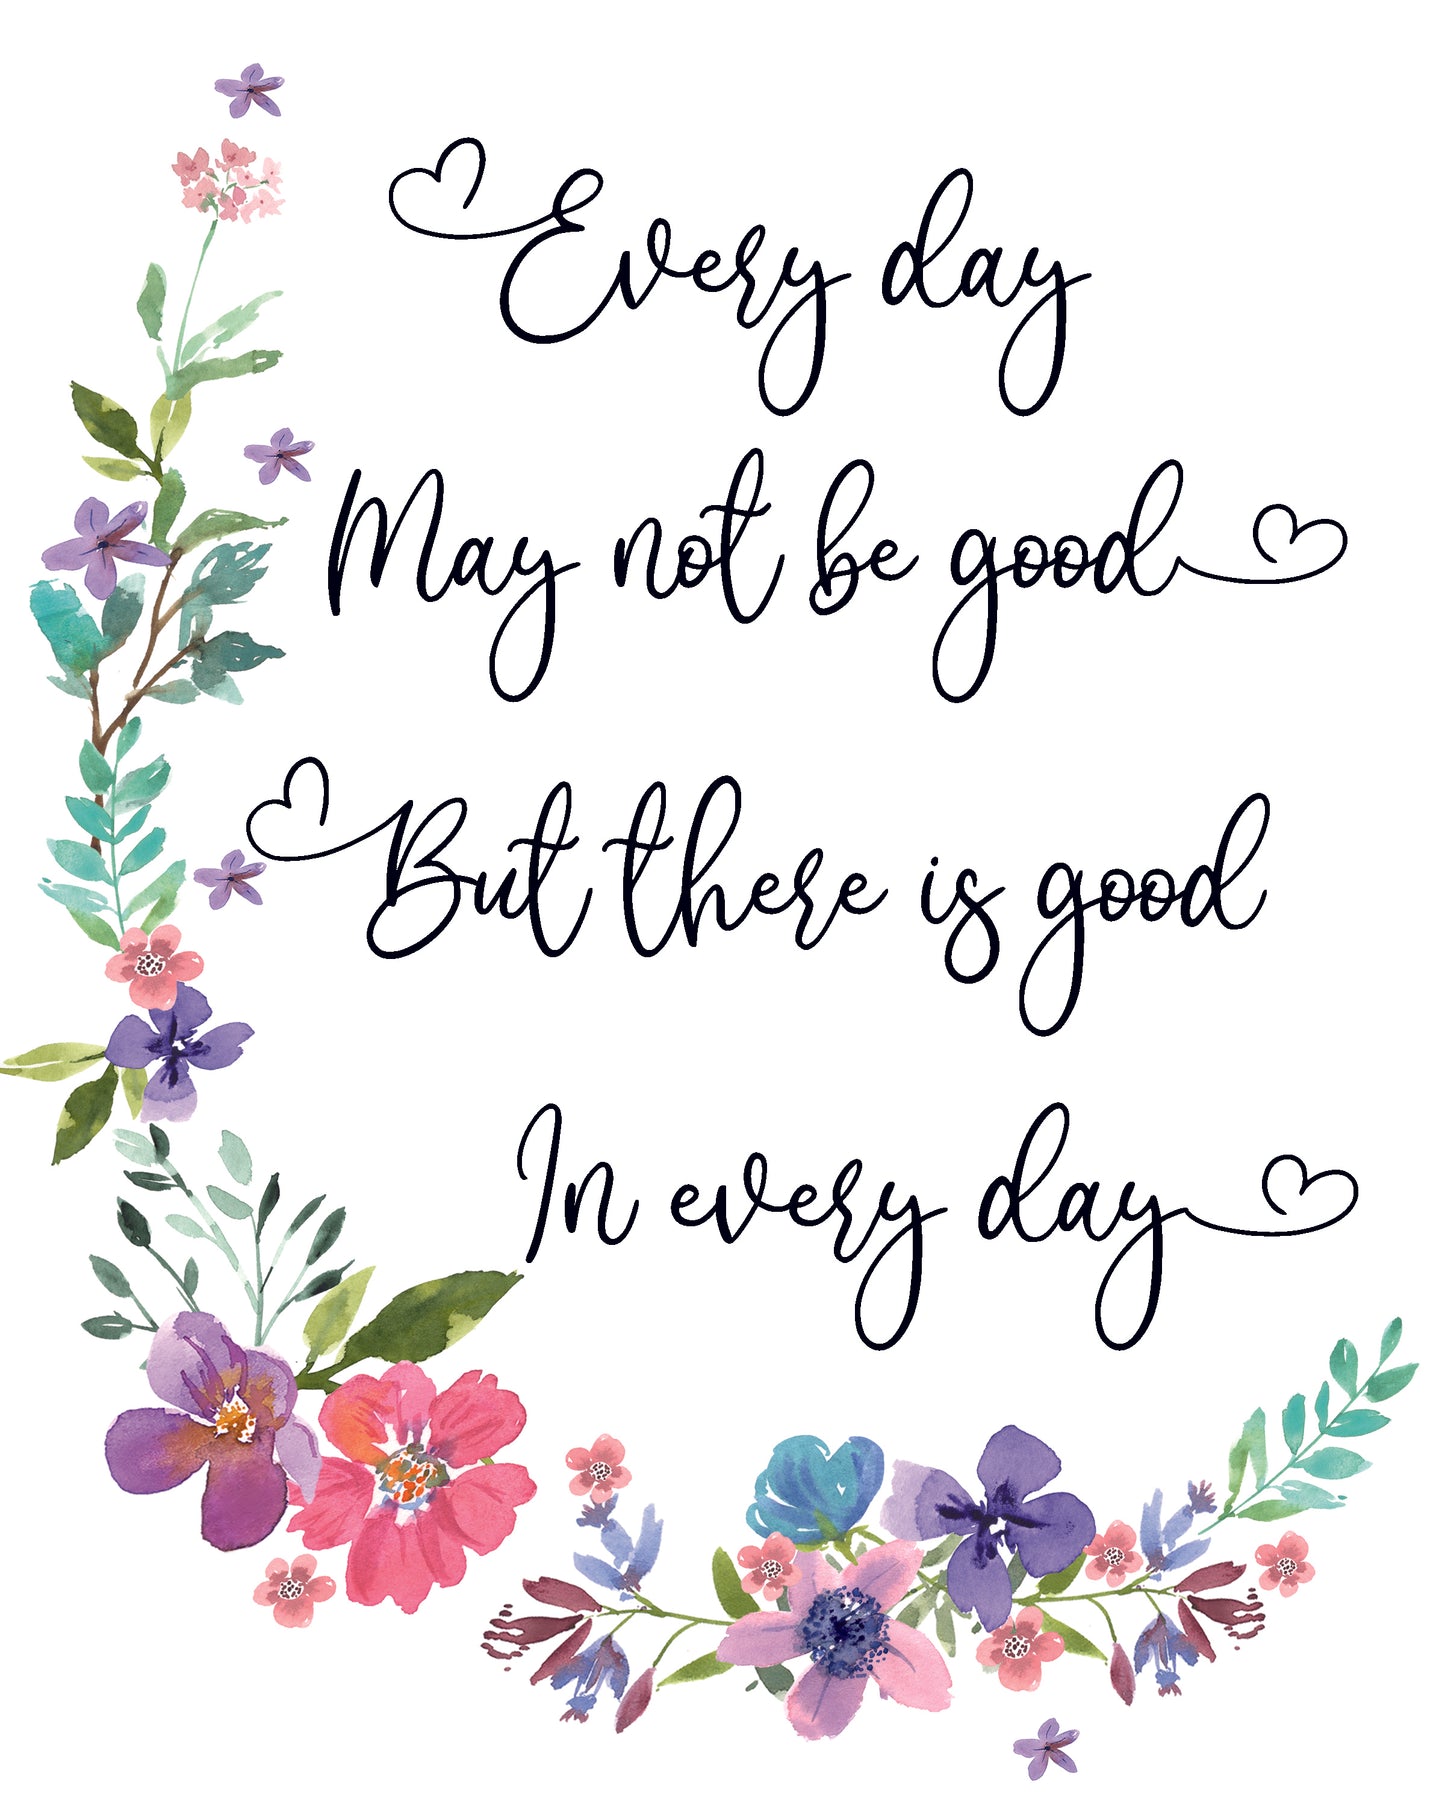 Sentimental Quotes.  Every day may not be good but there is good in every day